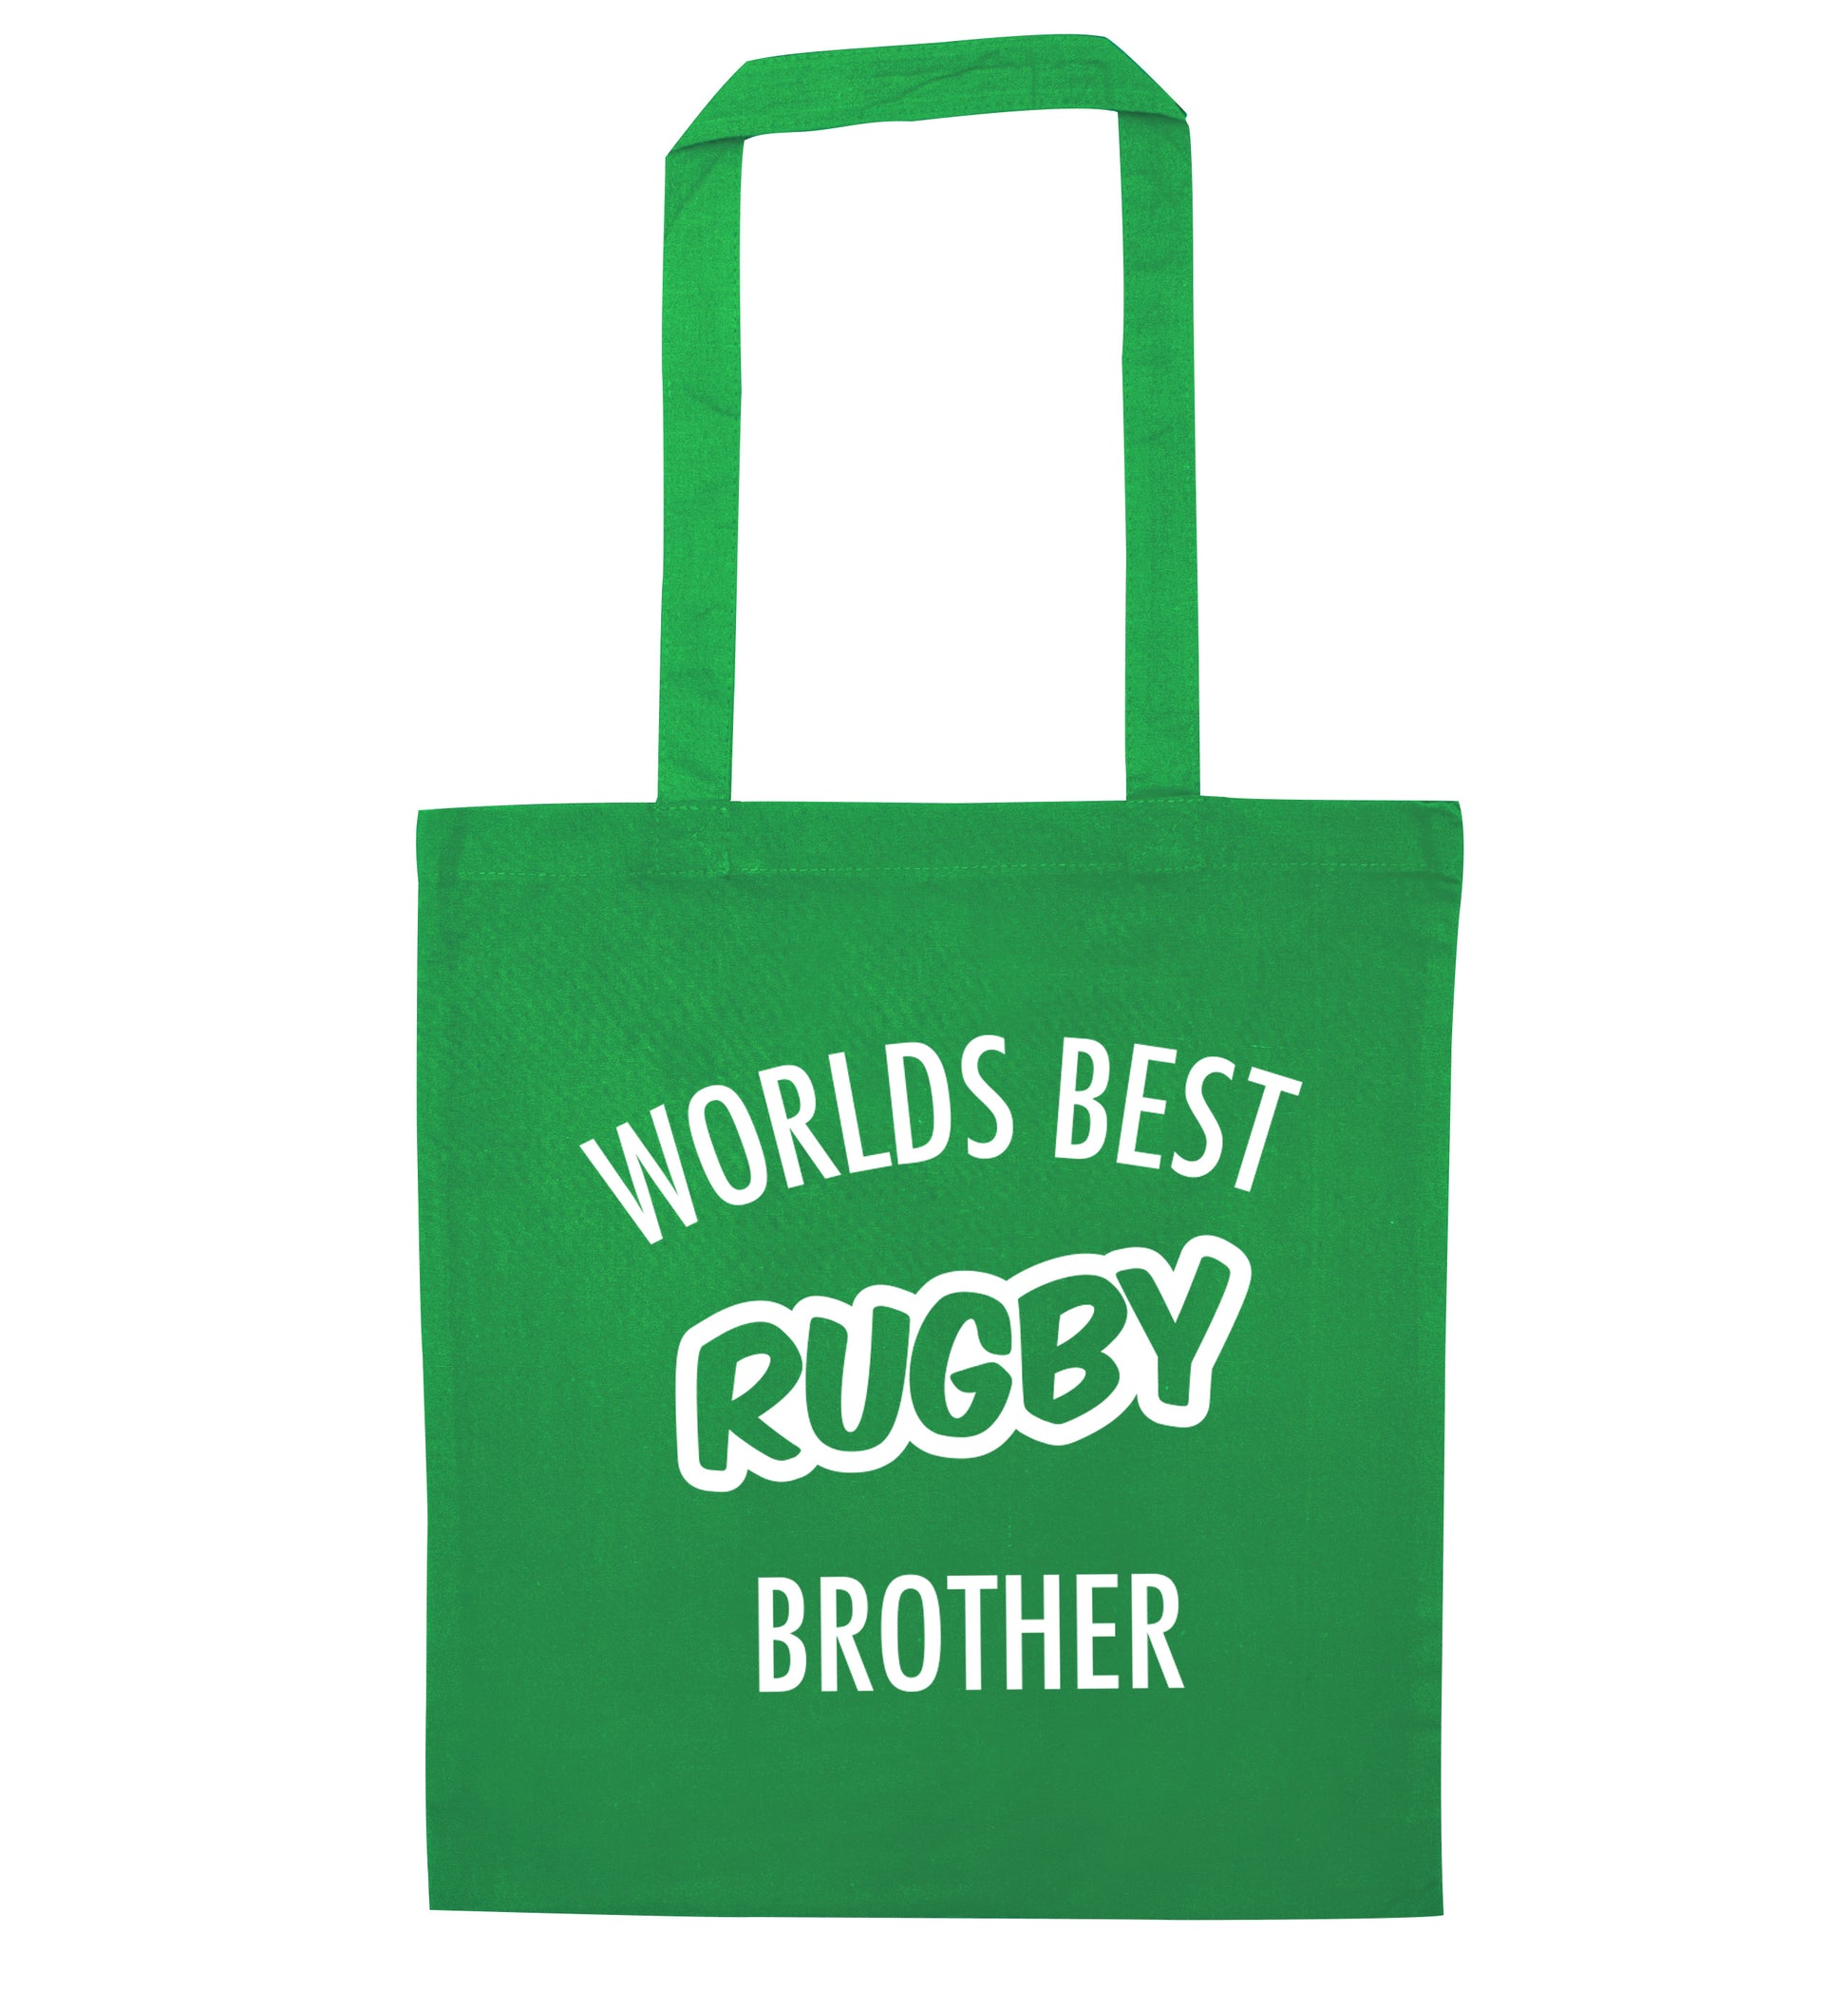 Worlds best rugby brother green tote bag